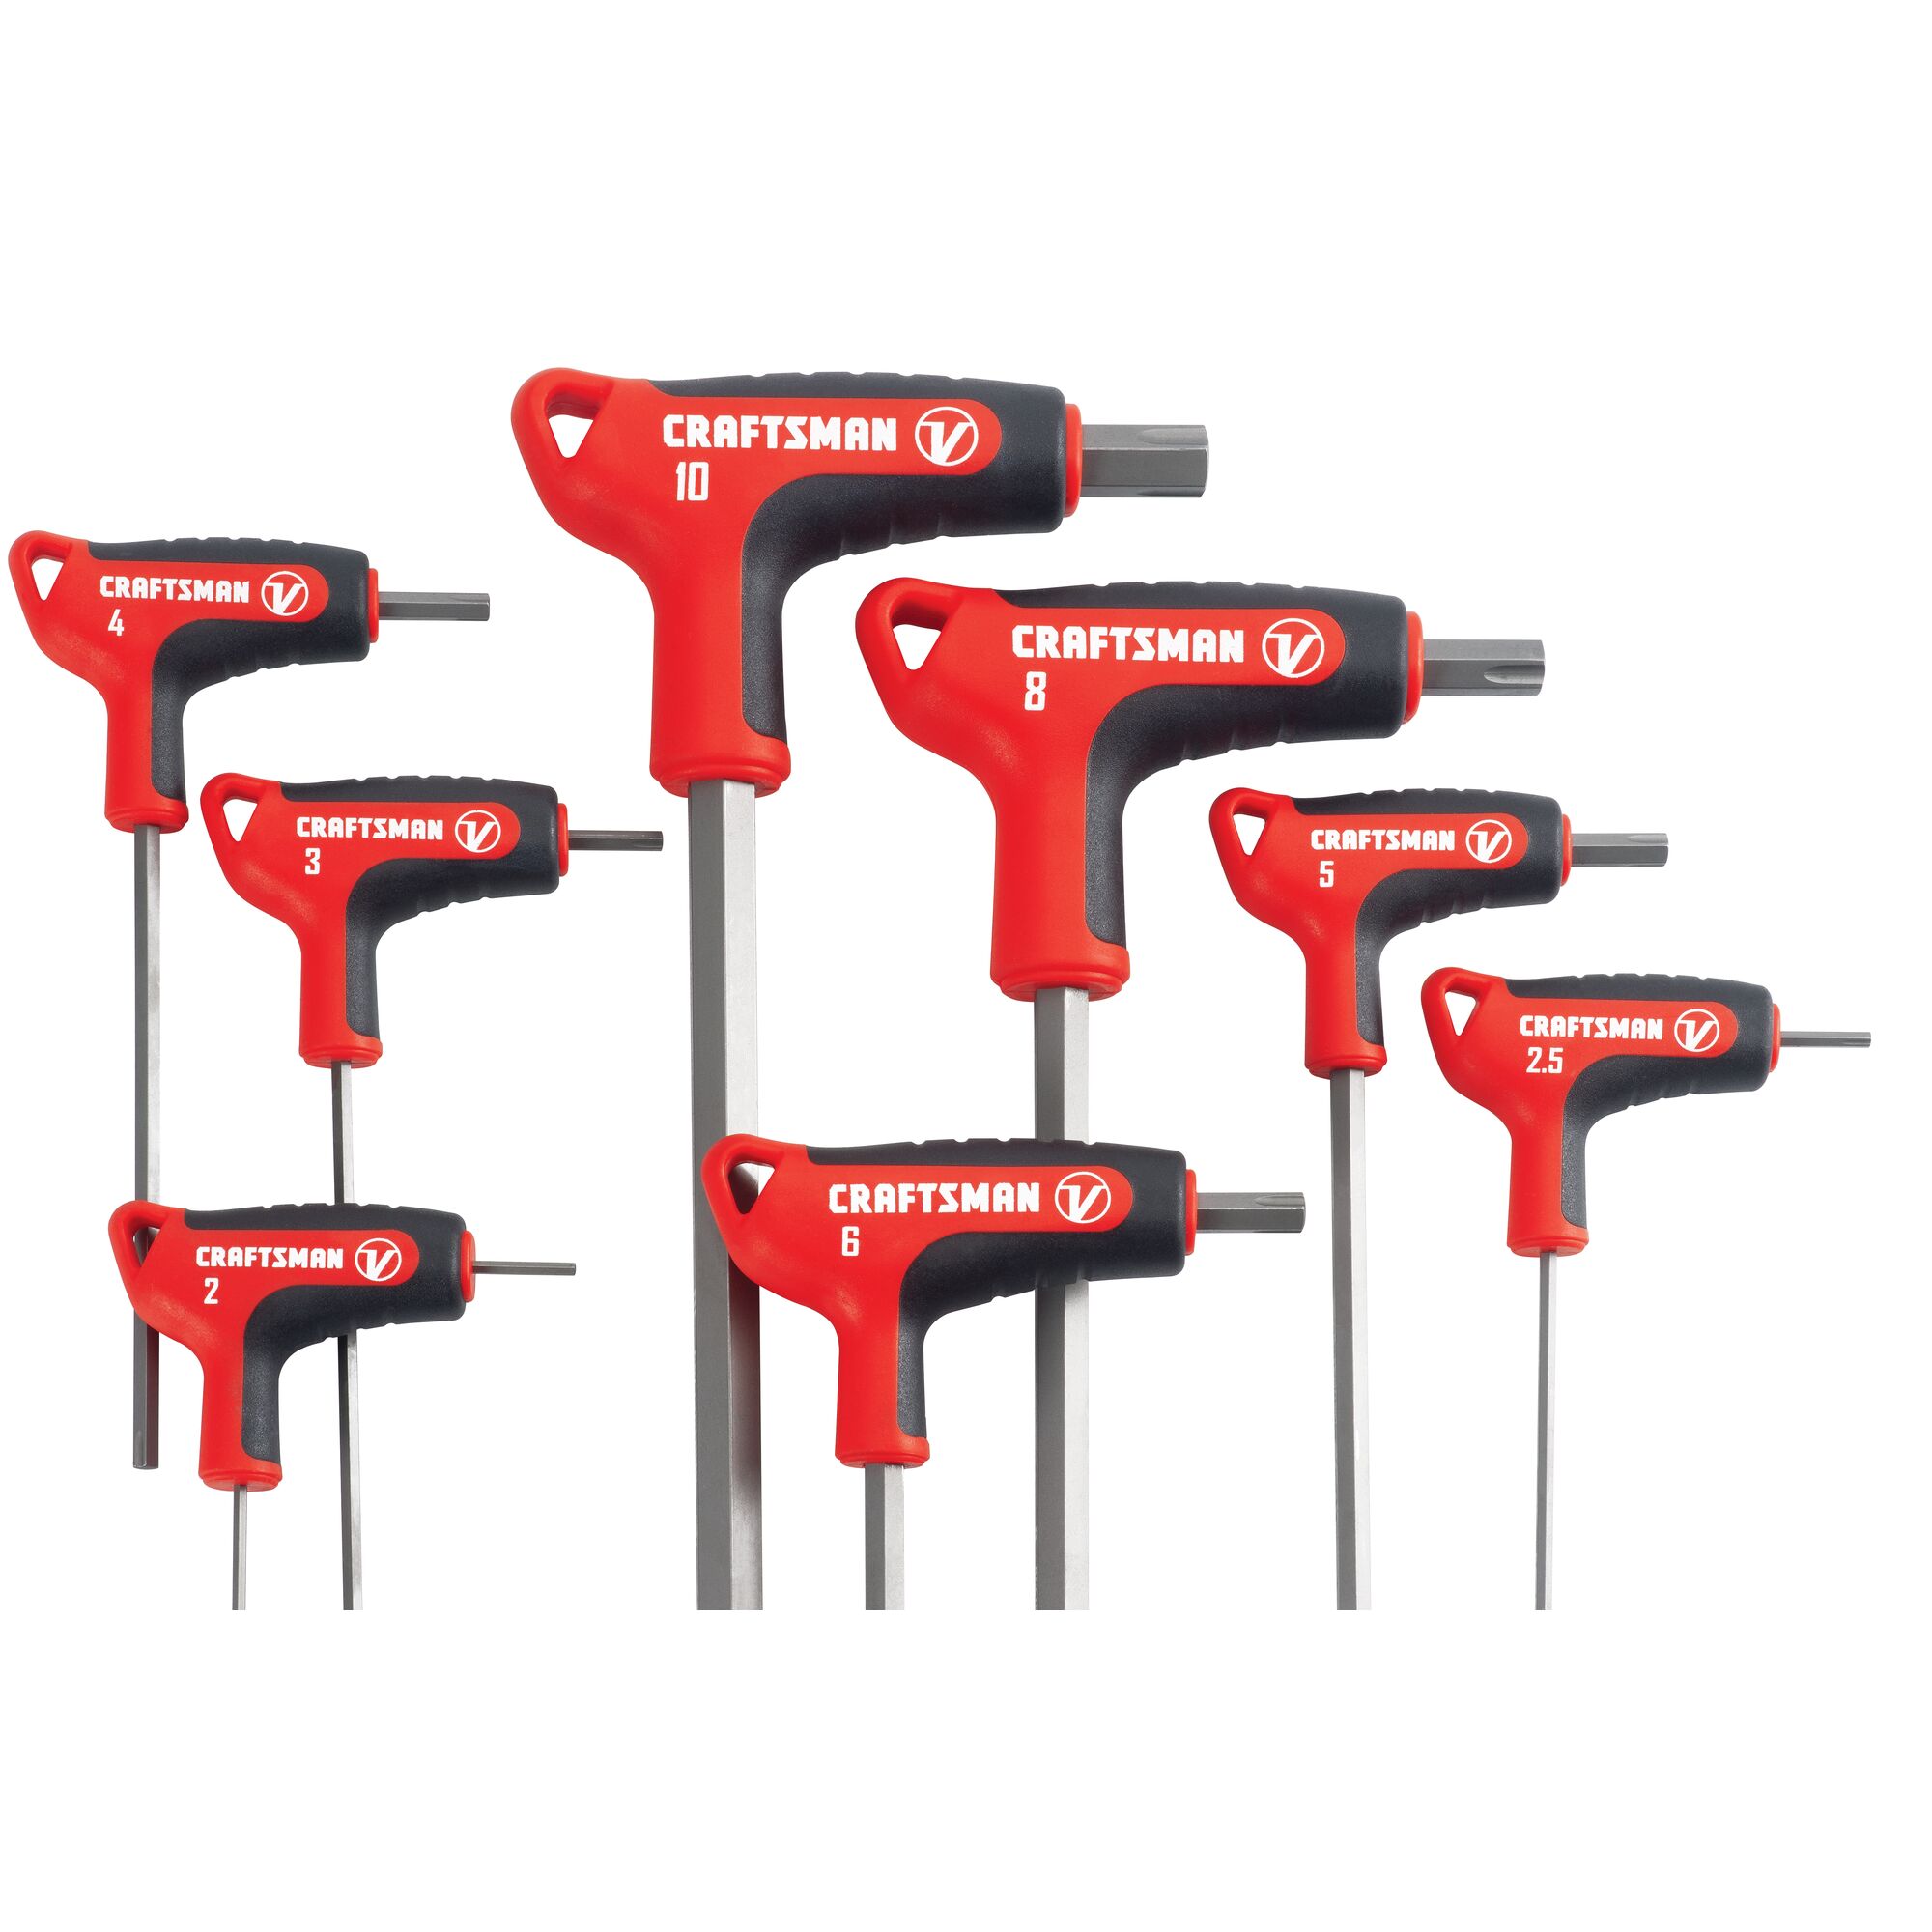 View of CRAFTSMAN Screwdrivers: Hex Keys highlighting product features